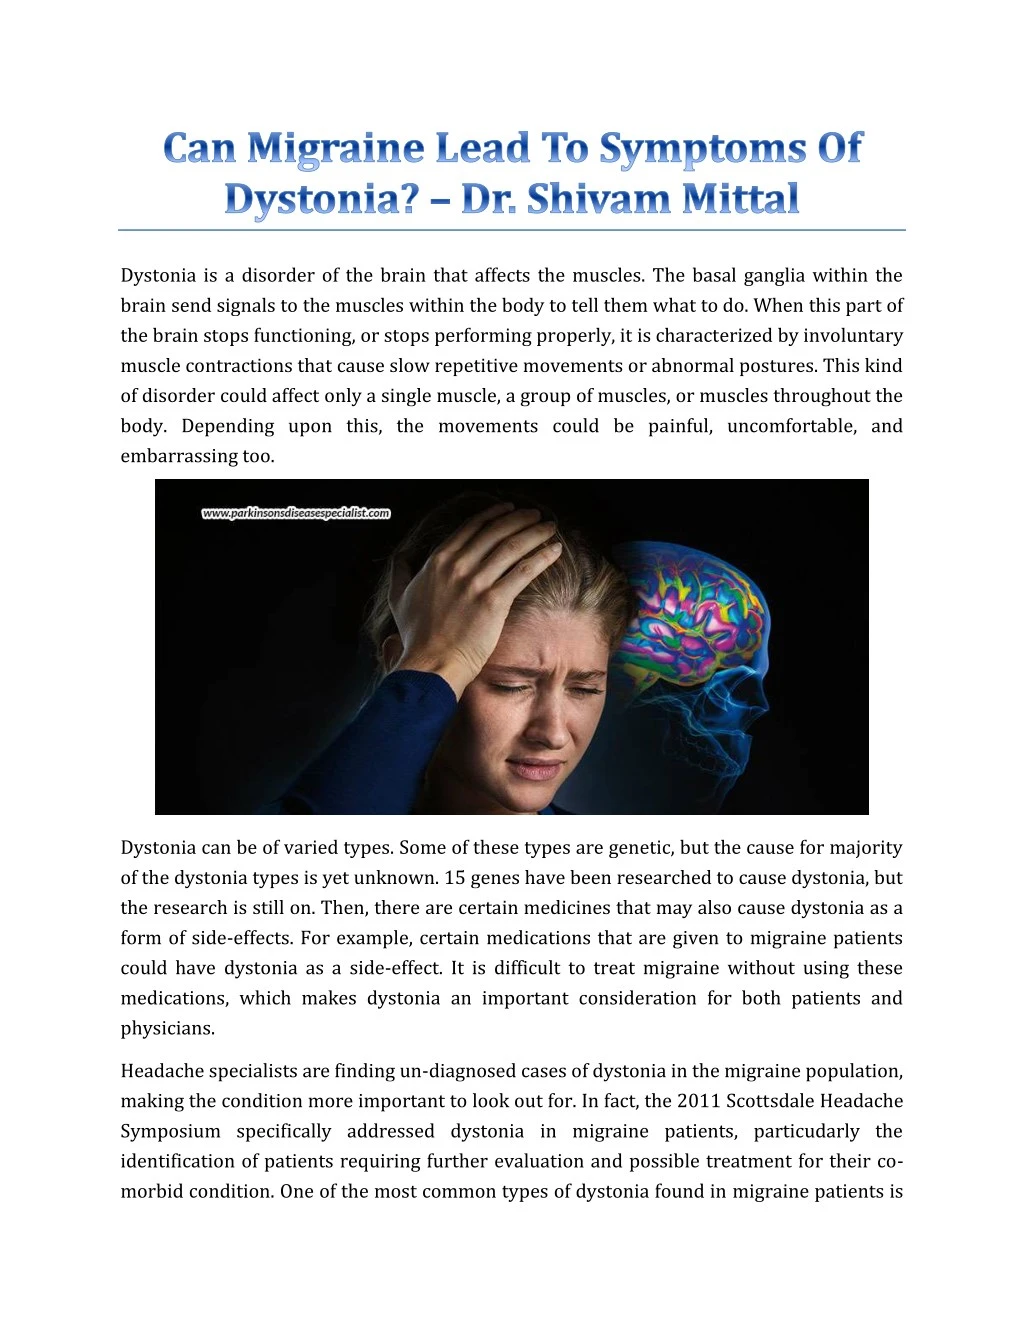 dystonia is a disorder of the brain that affects